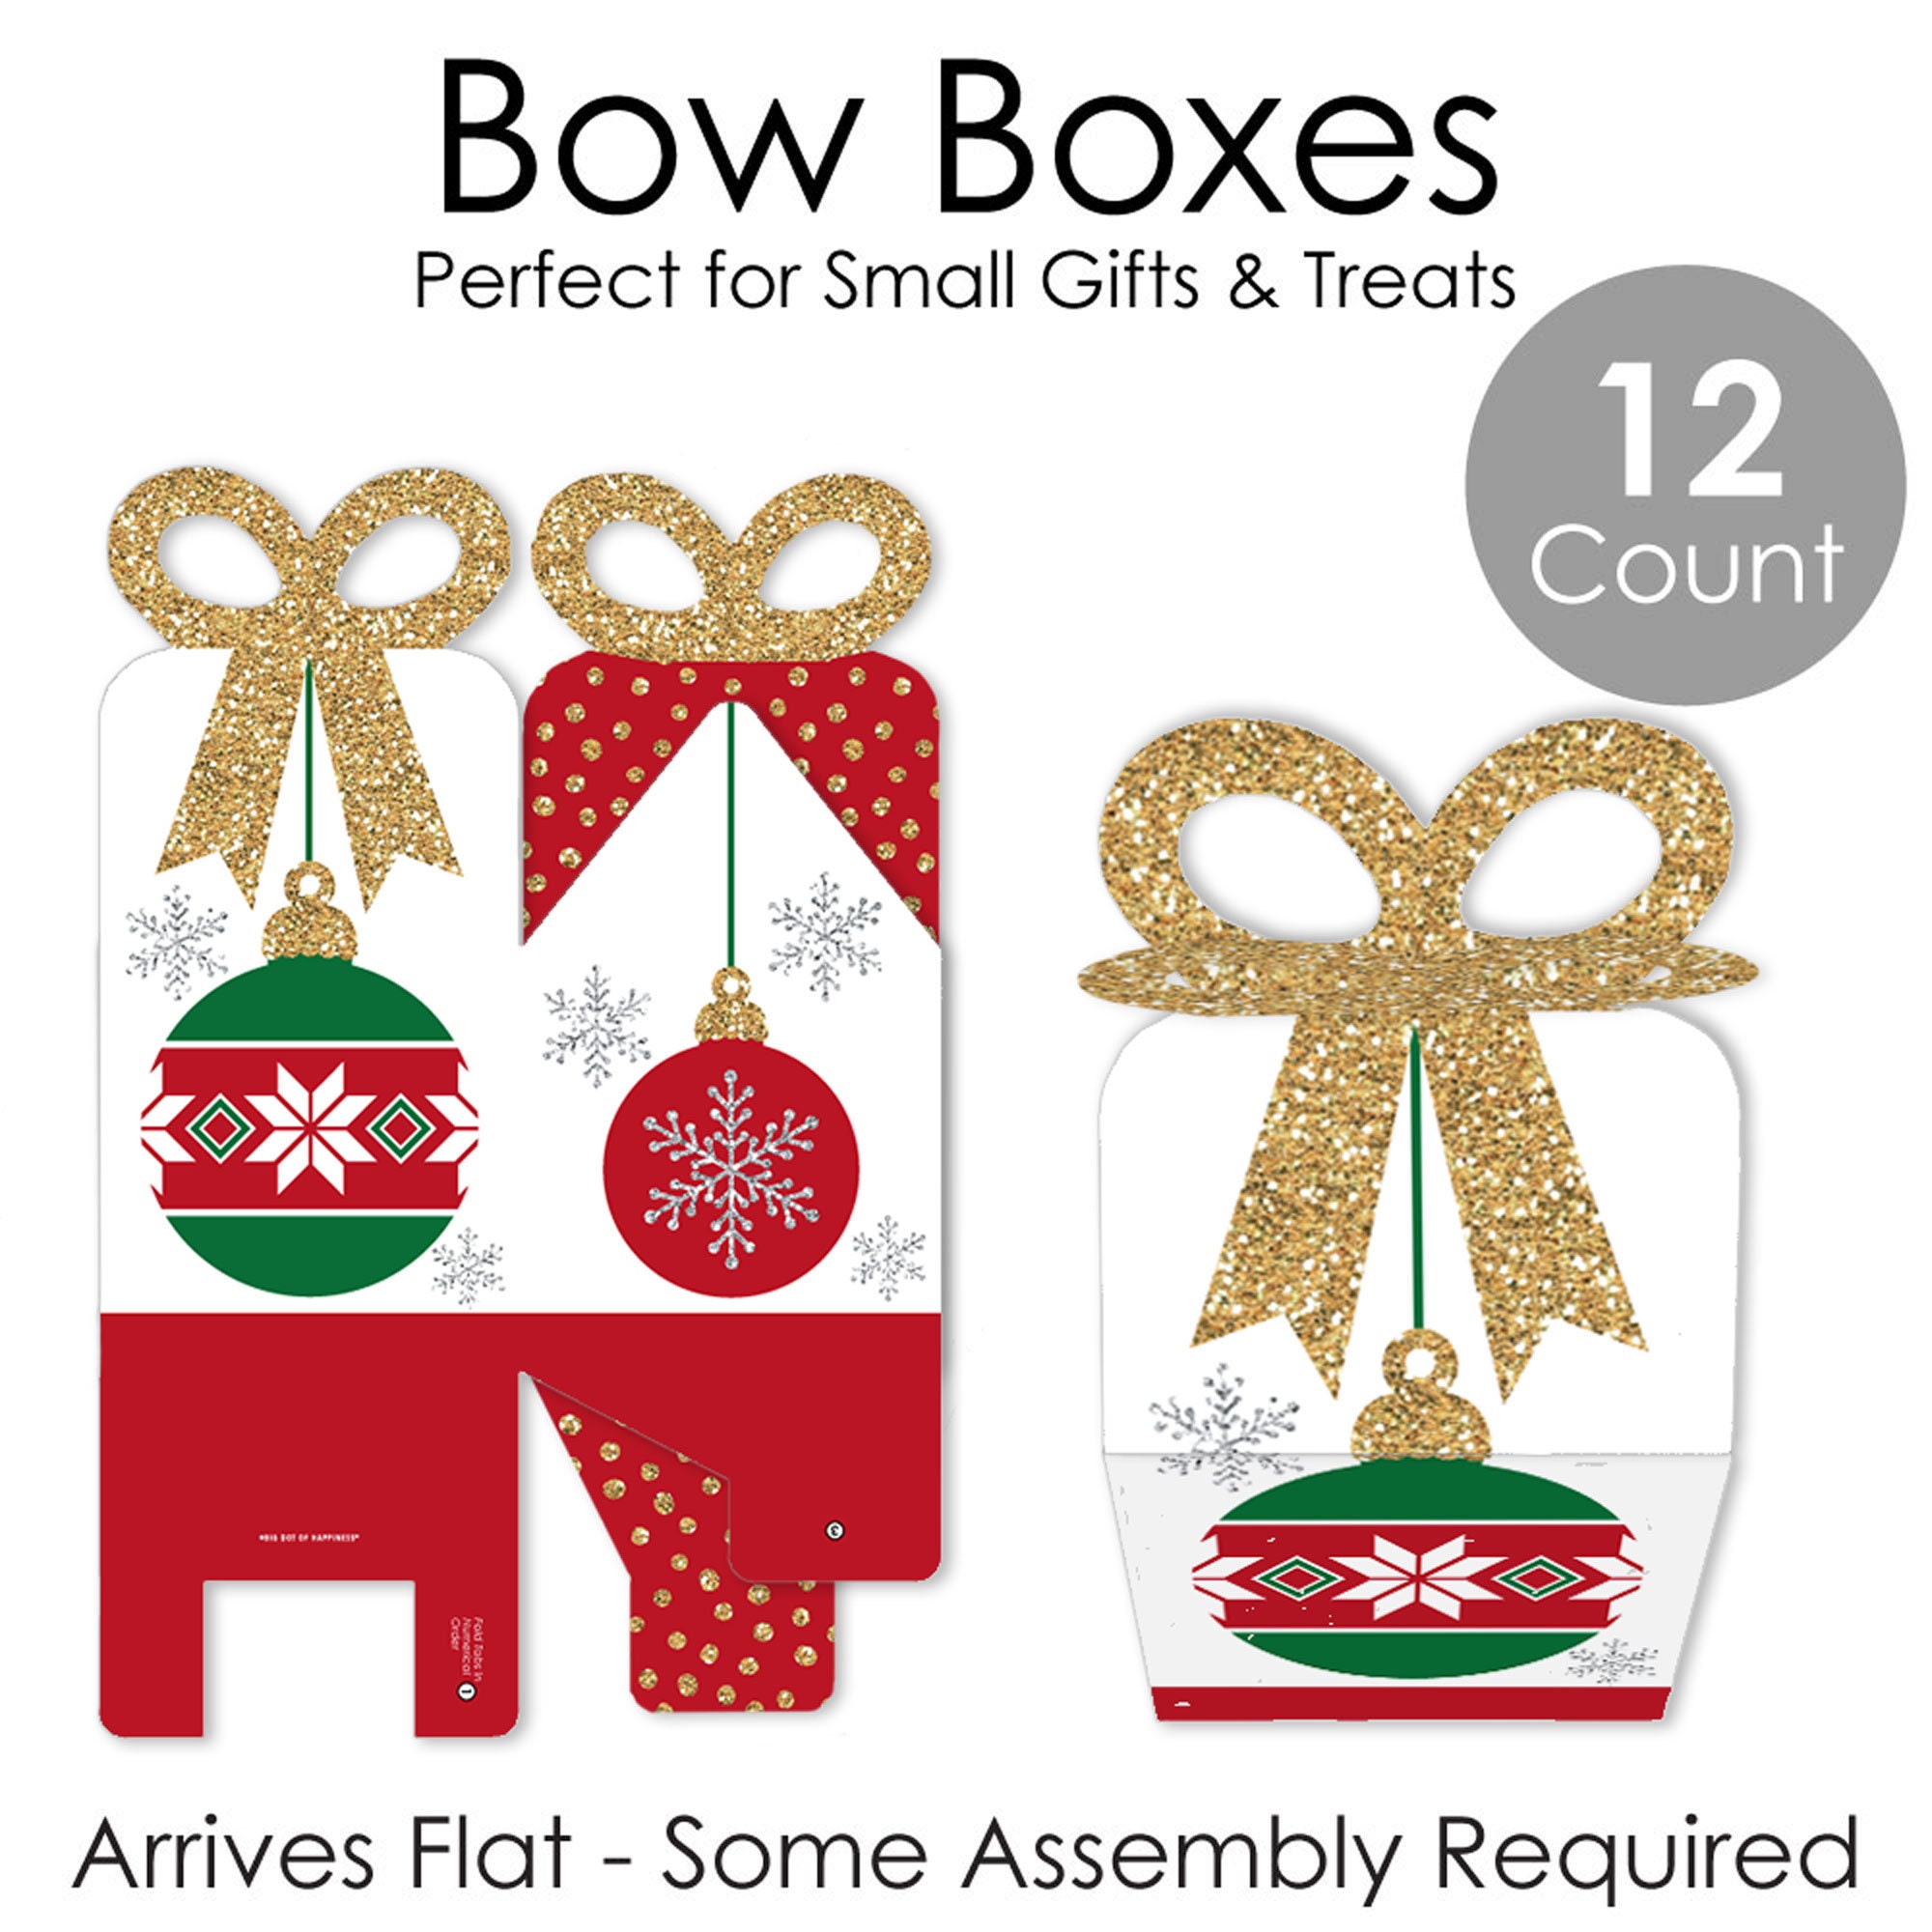 Formosa Crafts - Square Christmas Gift Boxes Ornaments